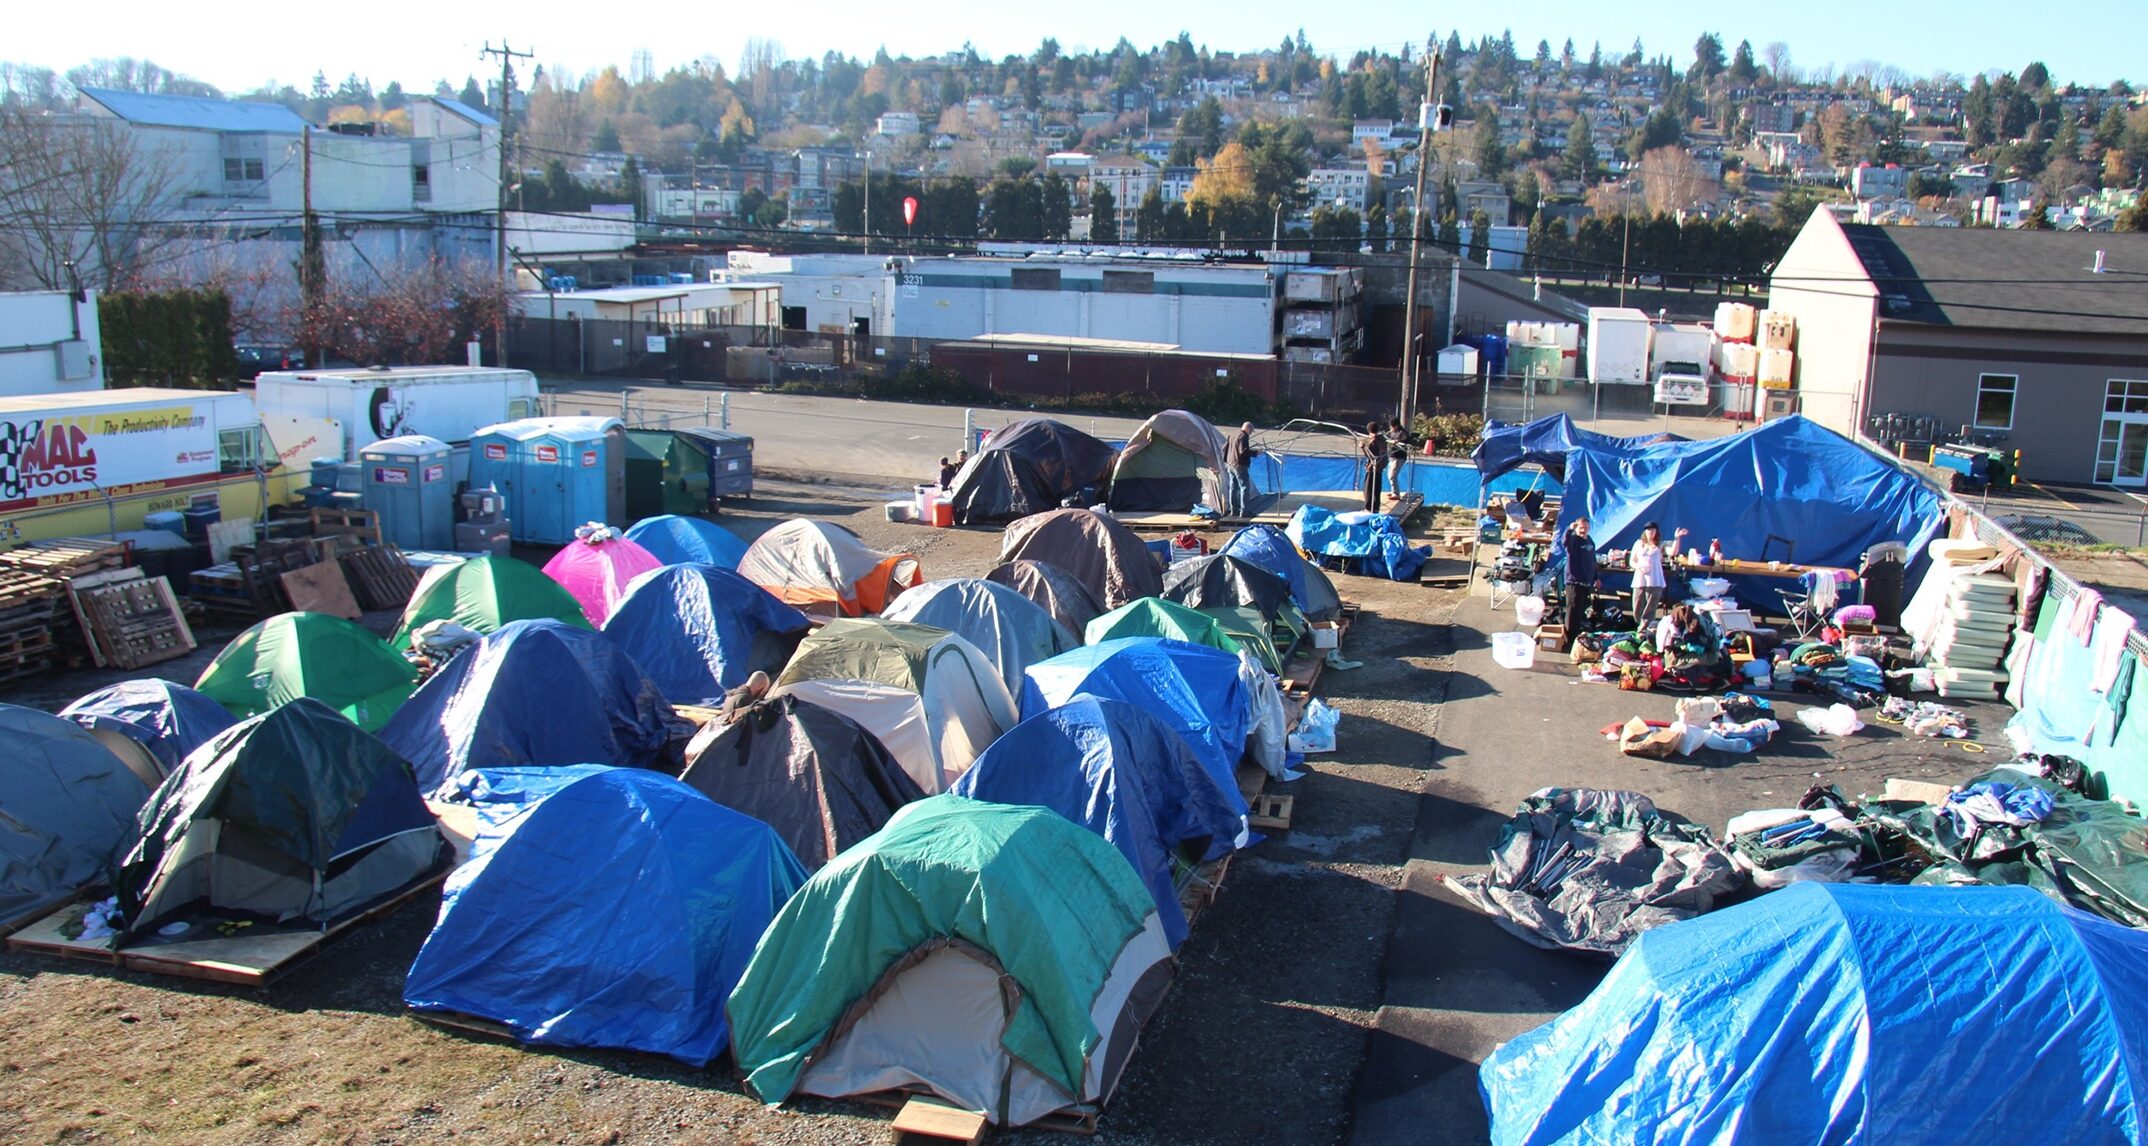 Mike Wierusz and his students spent a day visiting established
homeless encampments throughout Seattle, including Interbay’s Tent City. Photo
Courtesy of Shane Harms